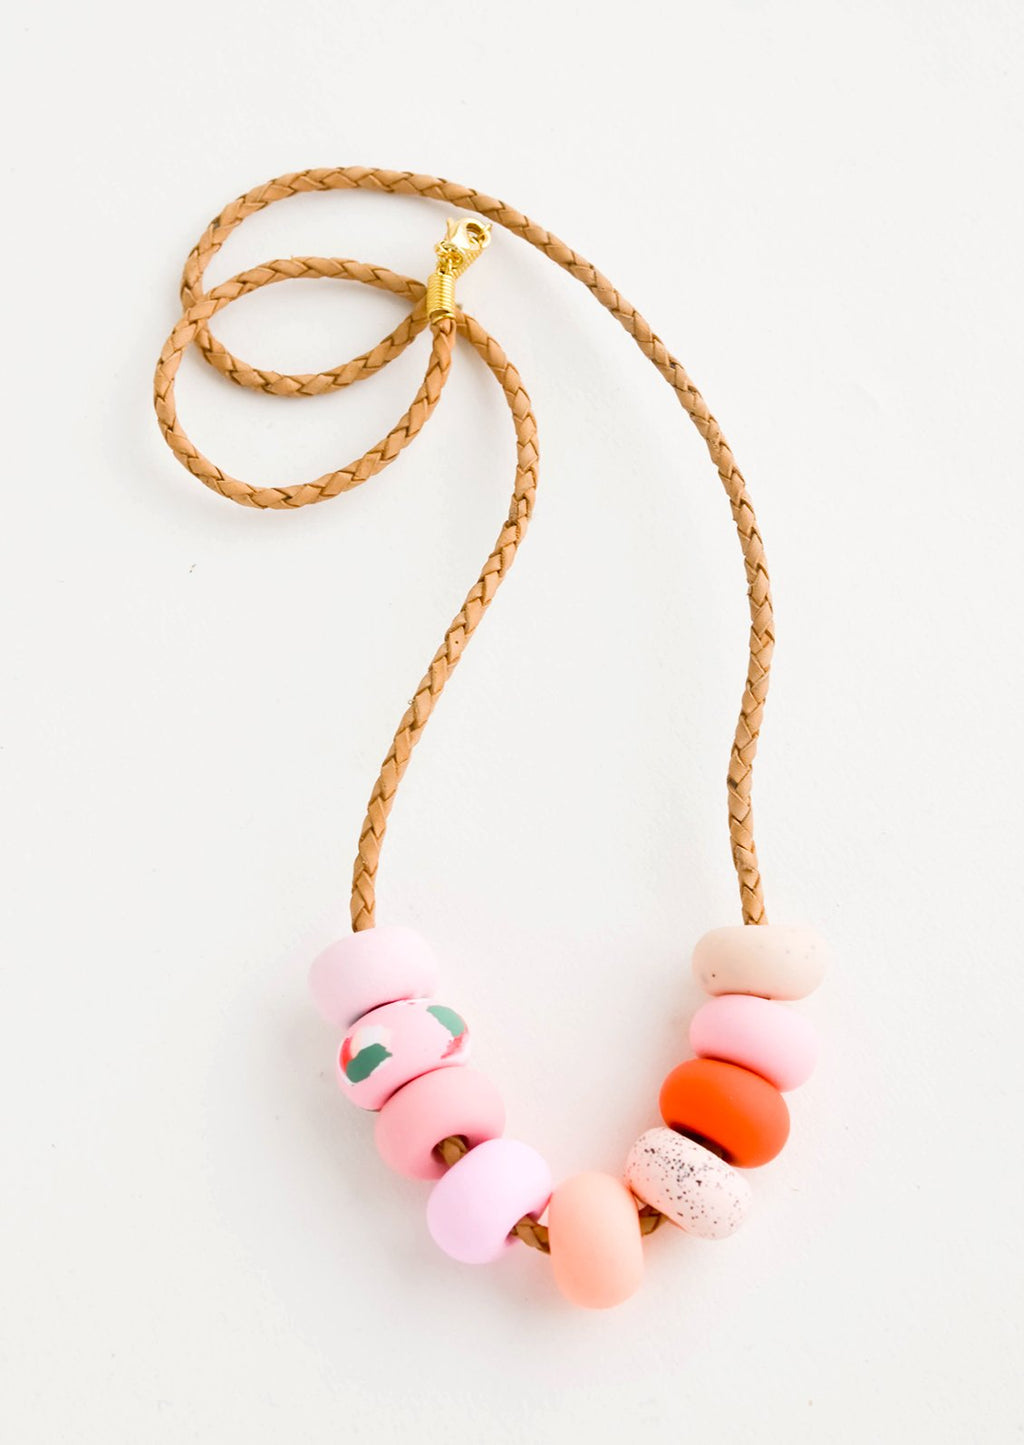 1: Necklace made from round clay beads in pink hues strung on braided leather cord